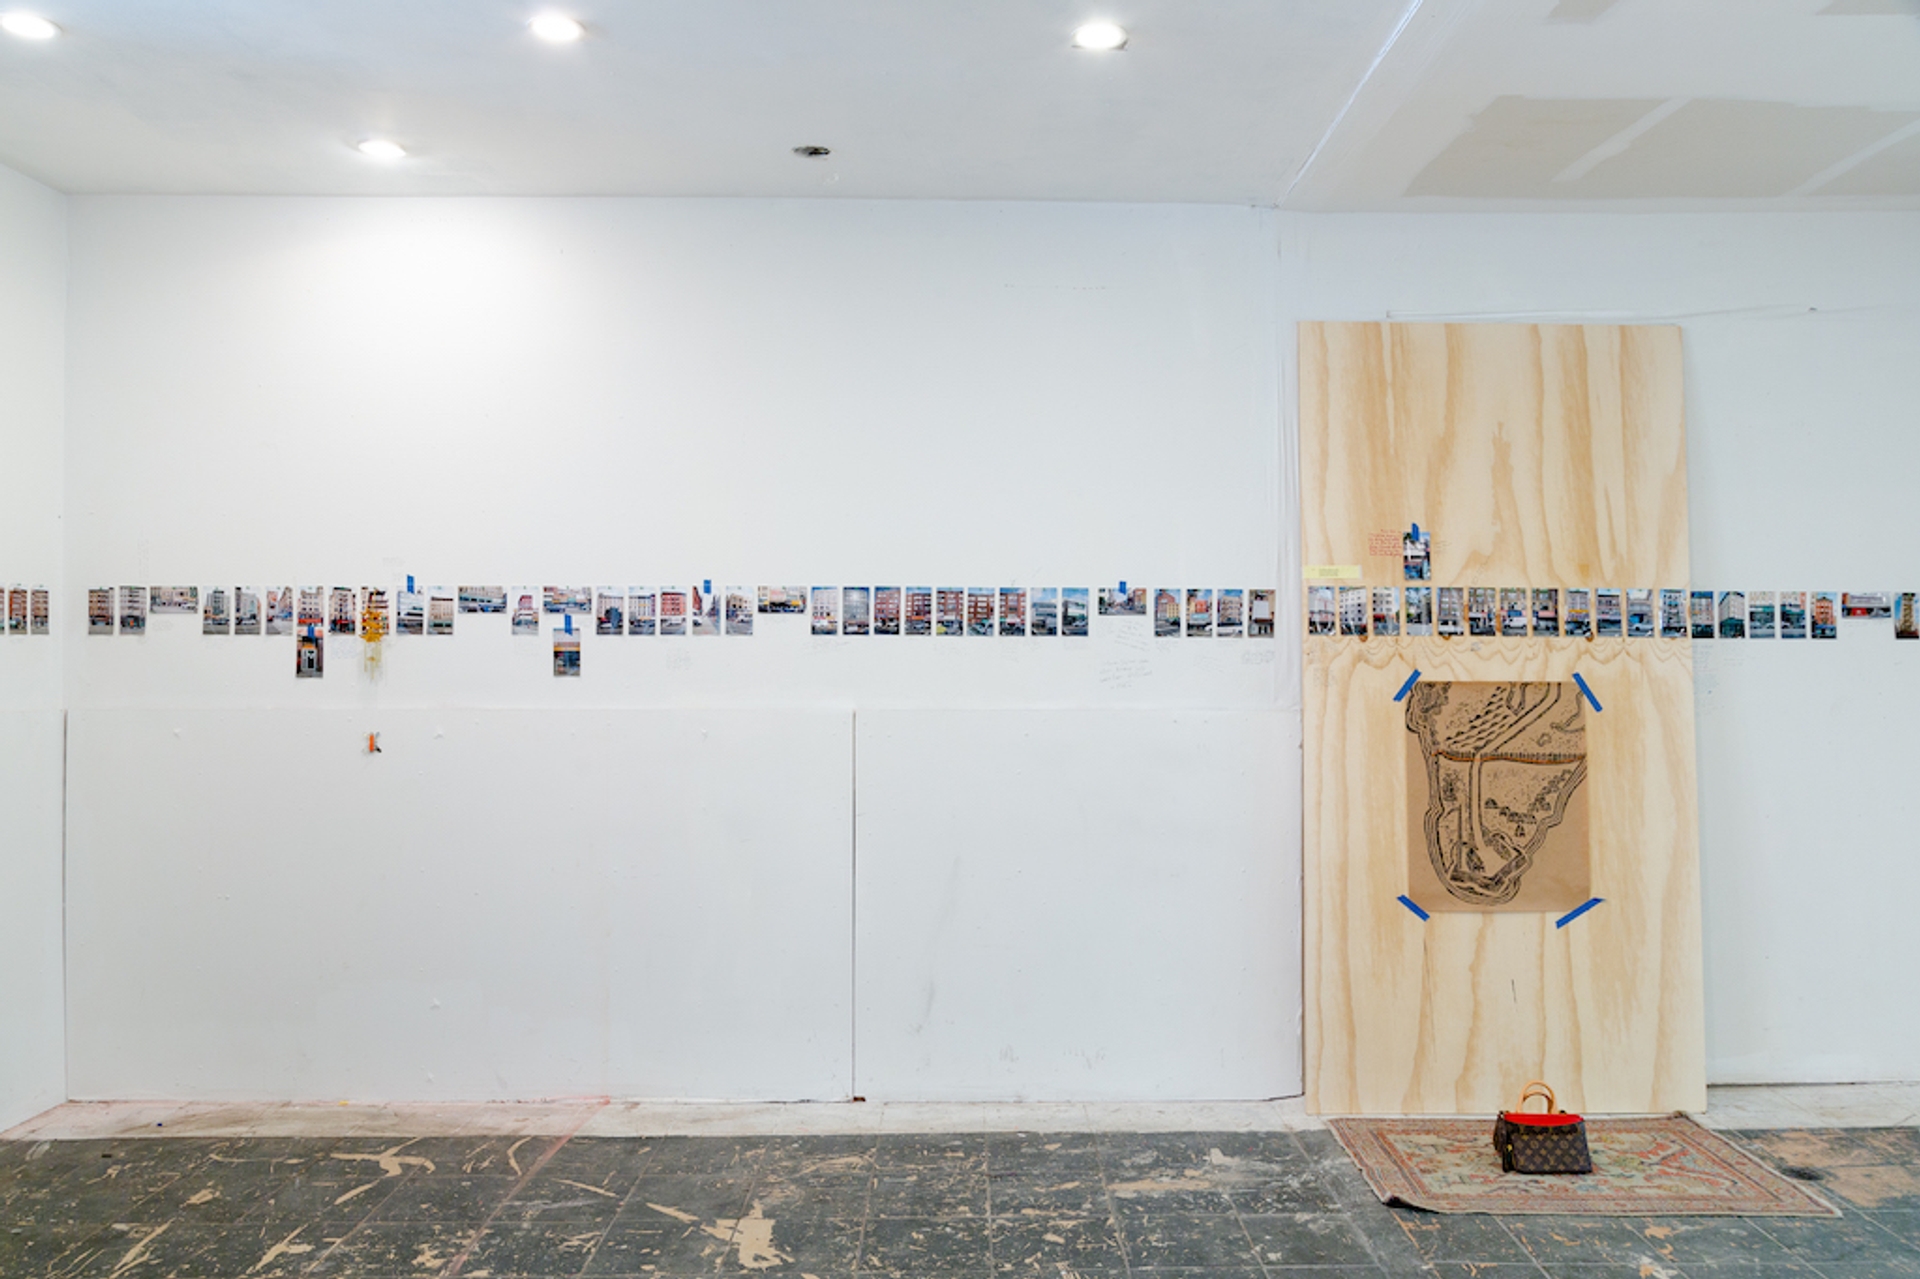 Installation views of Canal Street Research Association including a timeline/landscape wrapping around the room inviting visitors to inscribe themselves into it alongside highlights from the archive of poetry-garments. Photo by Daniel Terna. Courtesy Shanzhai Lyric.
